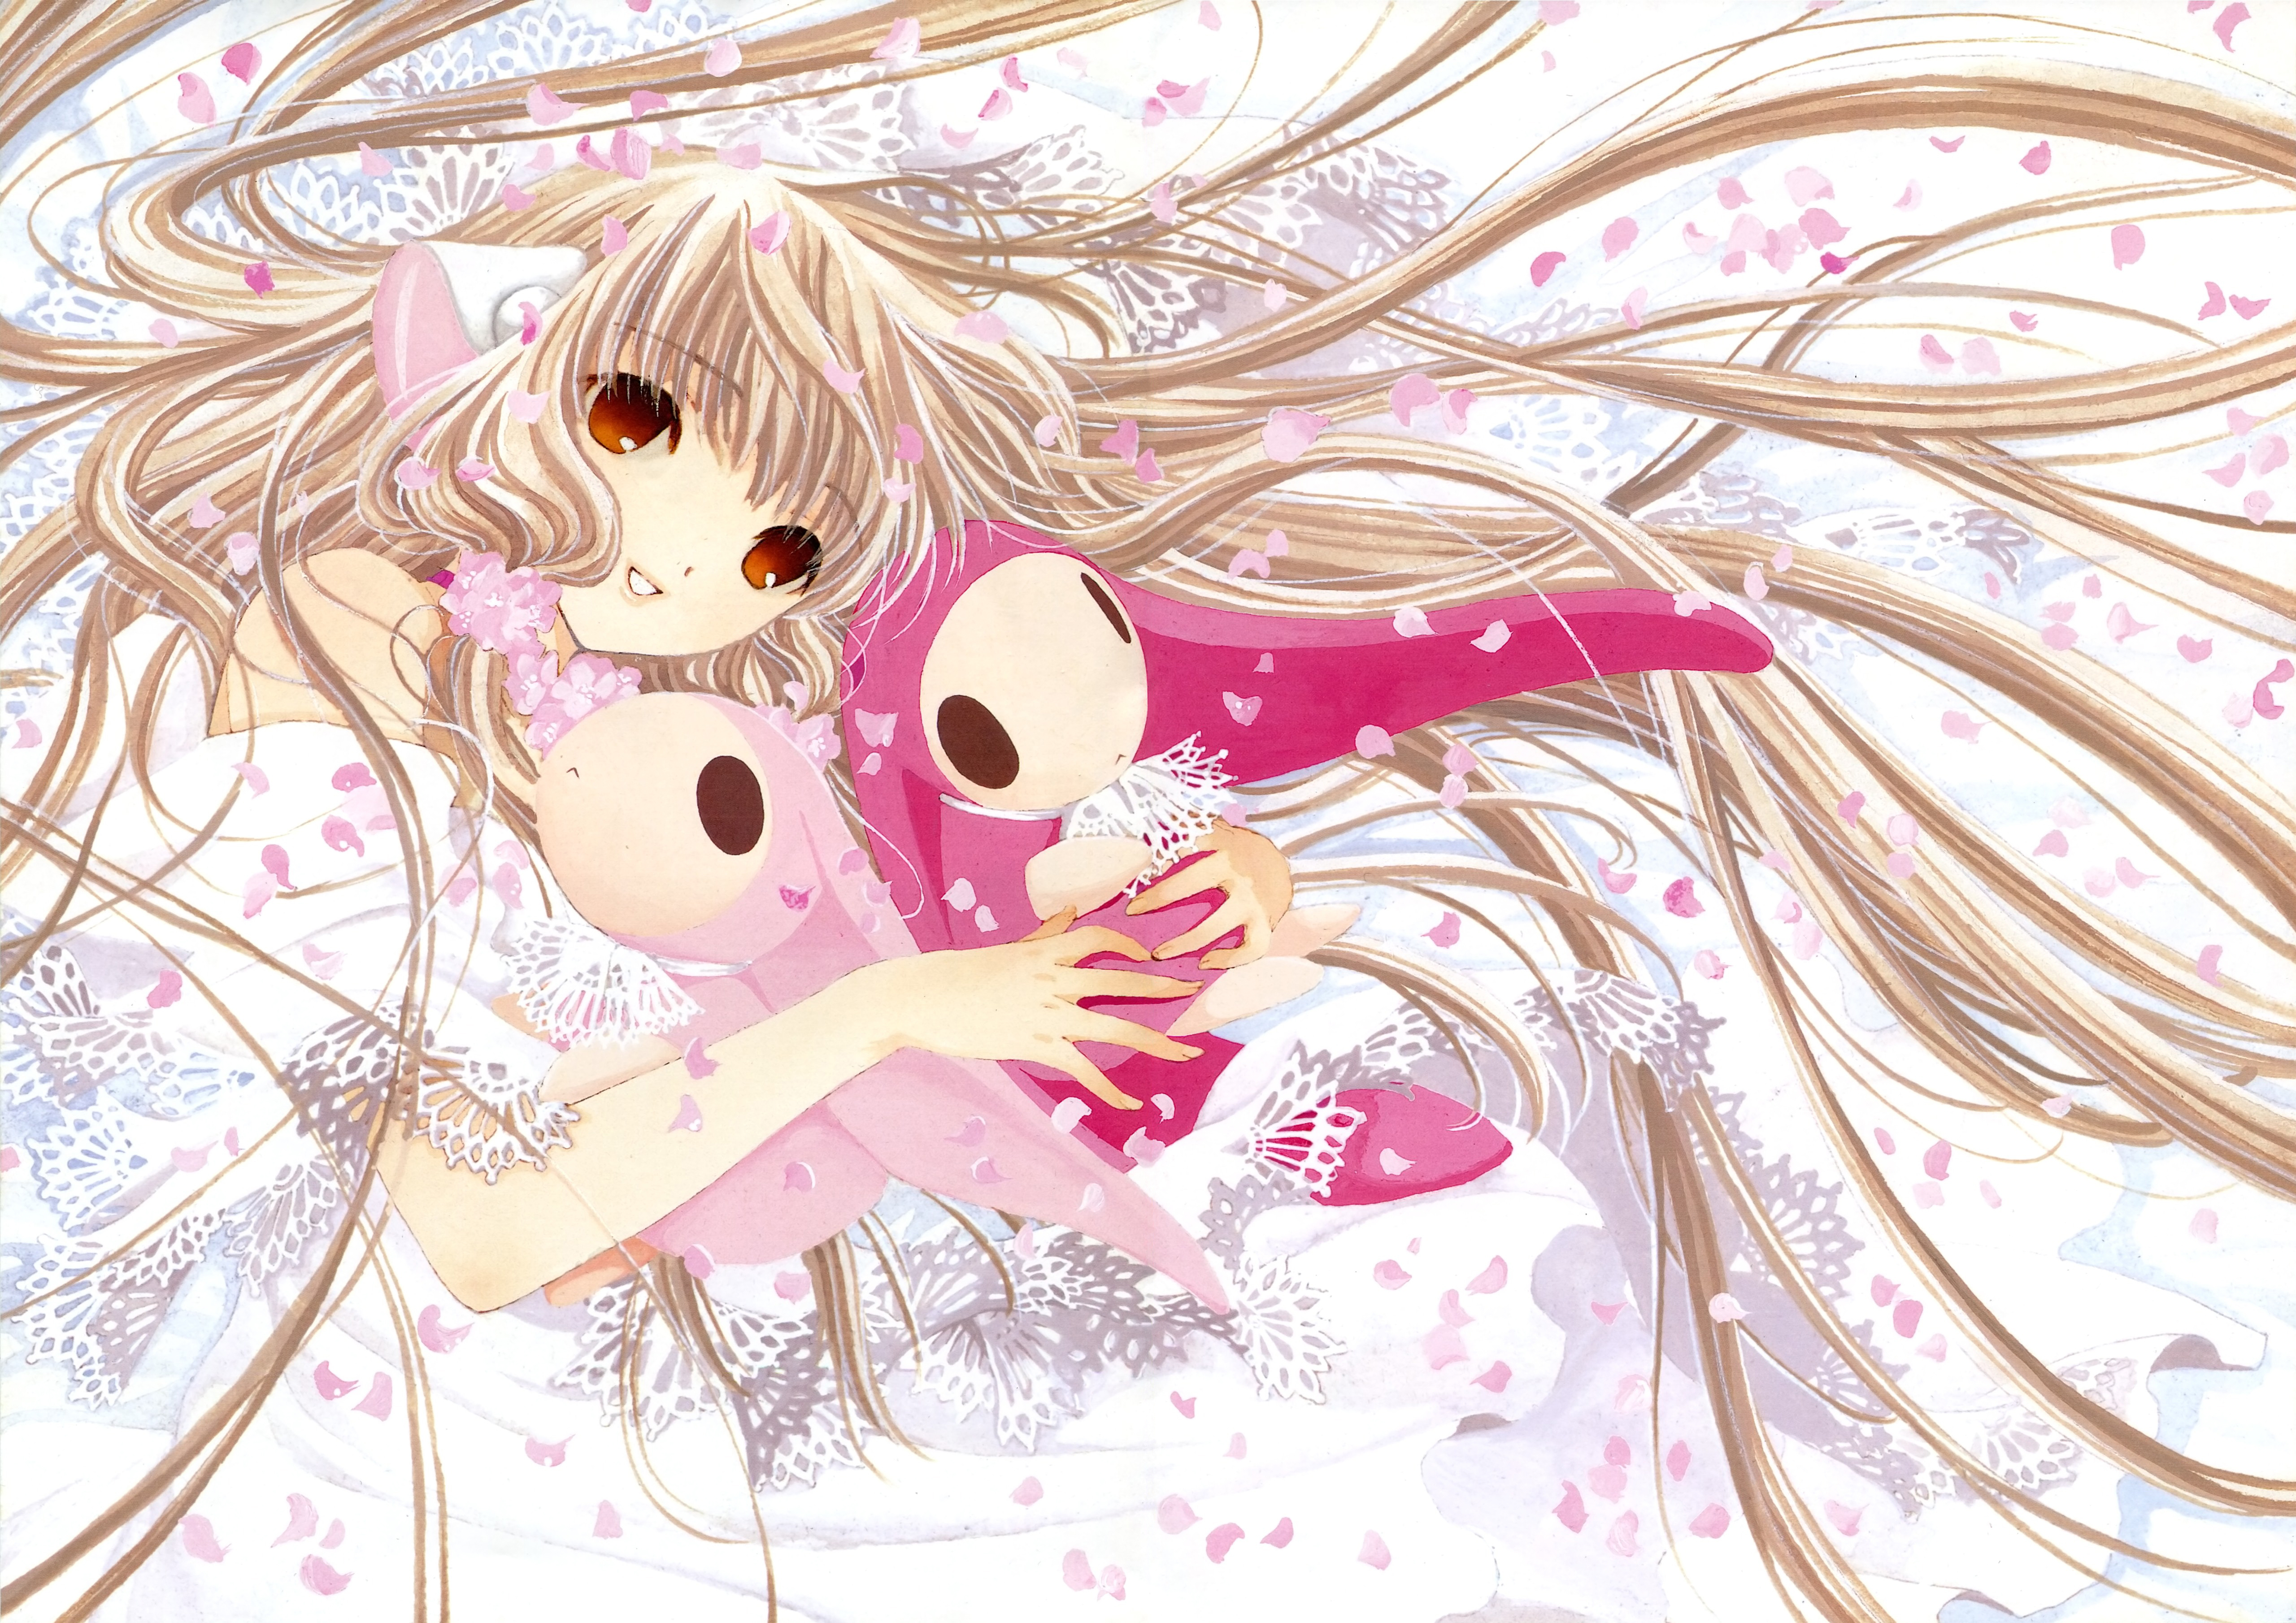 Chii From Chobits Anime Girls Wallpaper